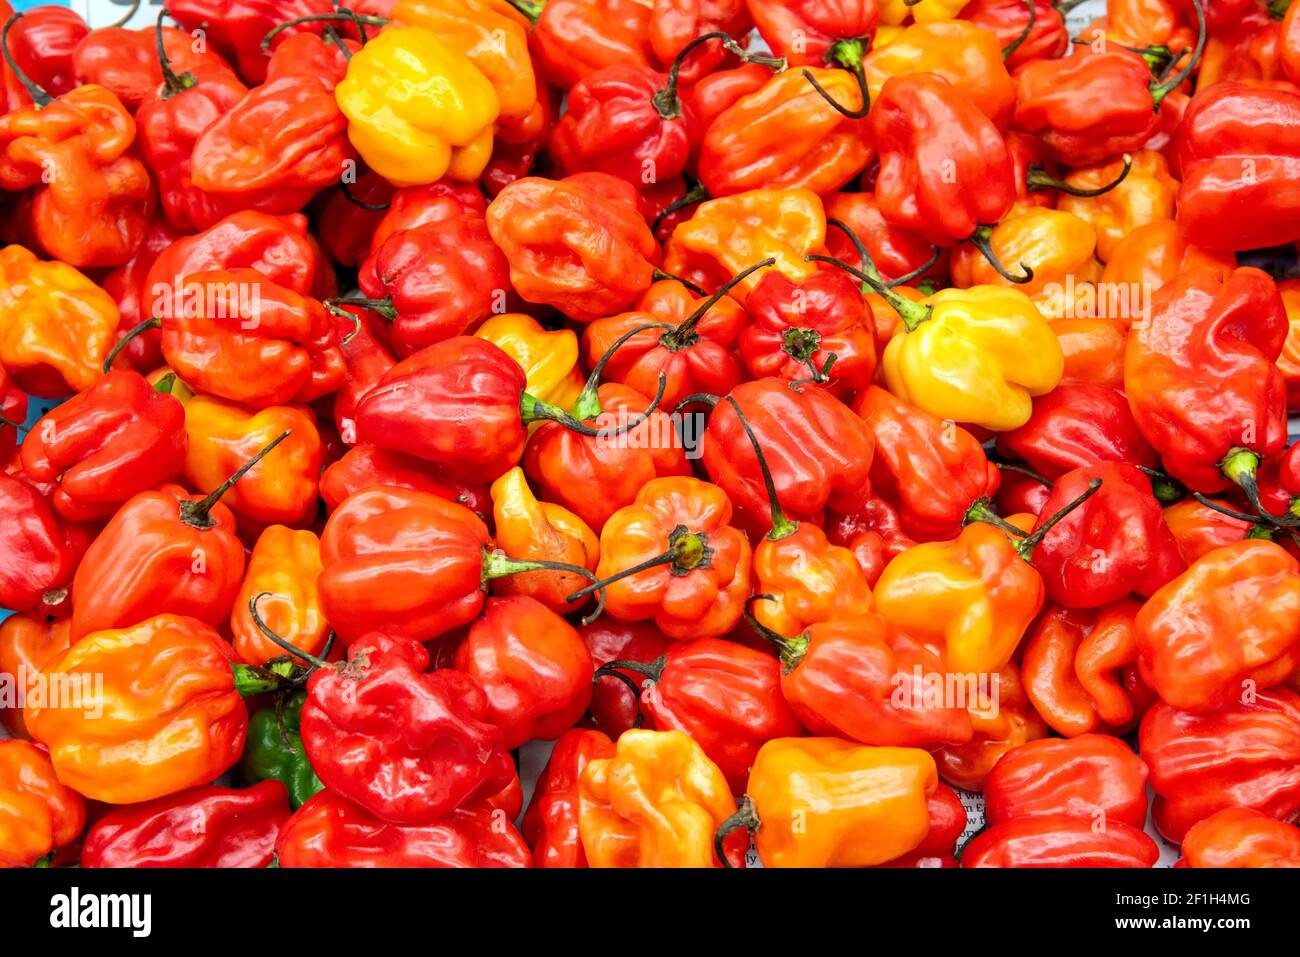 Fresh yellow, orange and red mini bell peppers for sale at a market Stock Photo